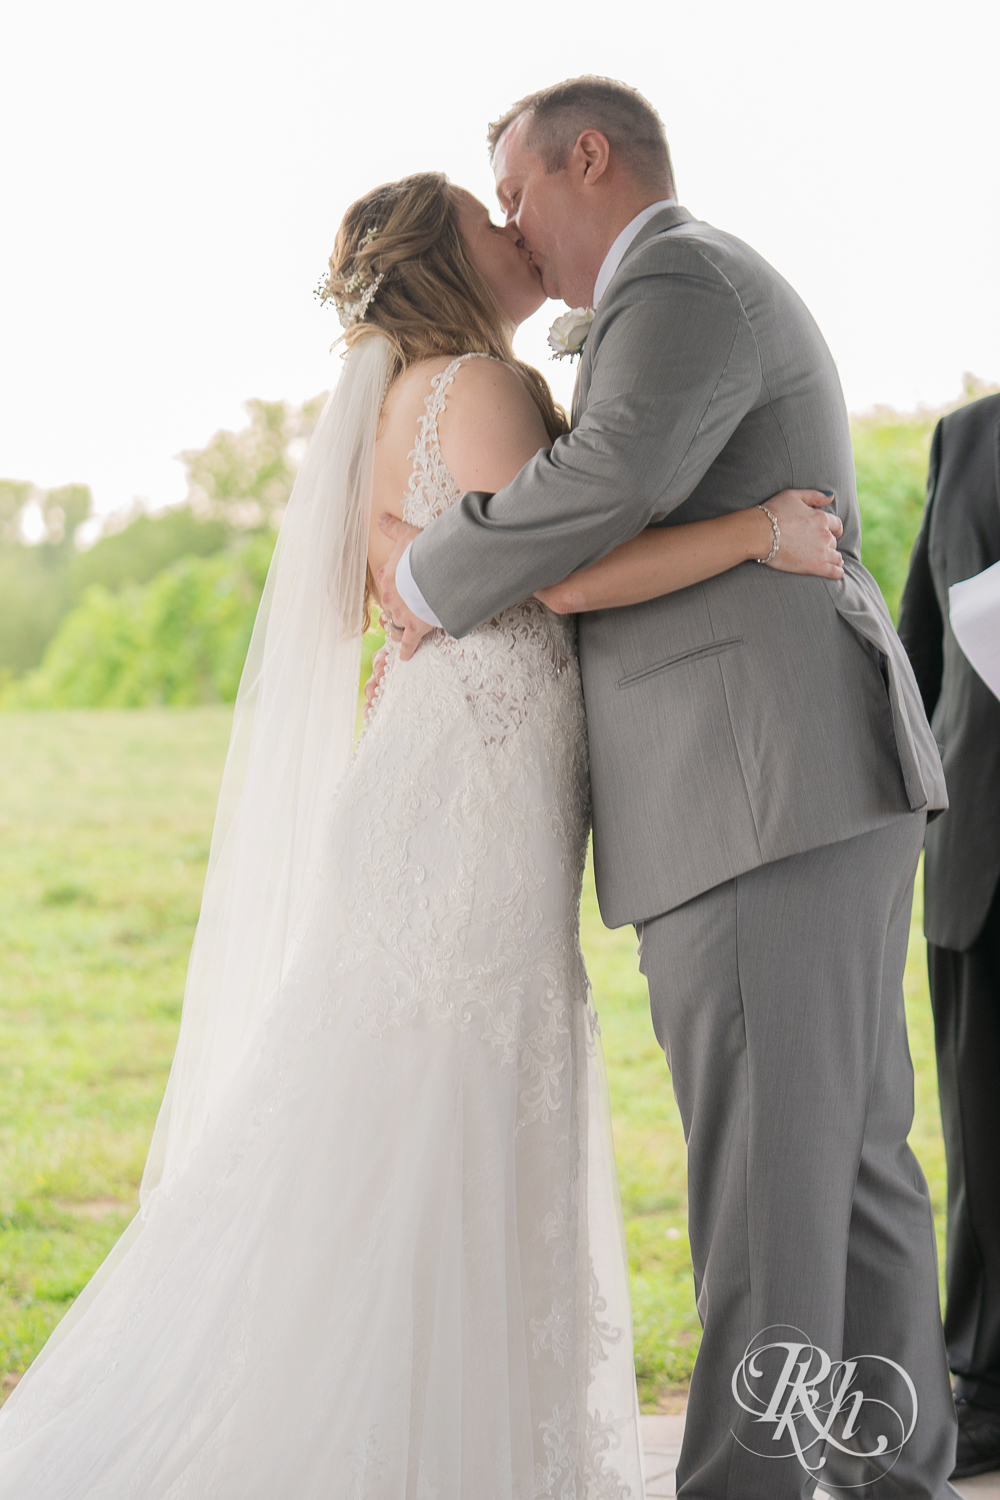 Bride and groom kiss at alter during wedding ceremony at 7 Vines Vineyard in Dellwood, Minnesota.